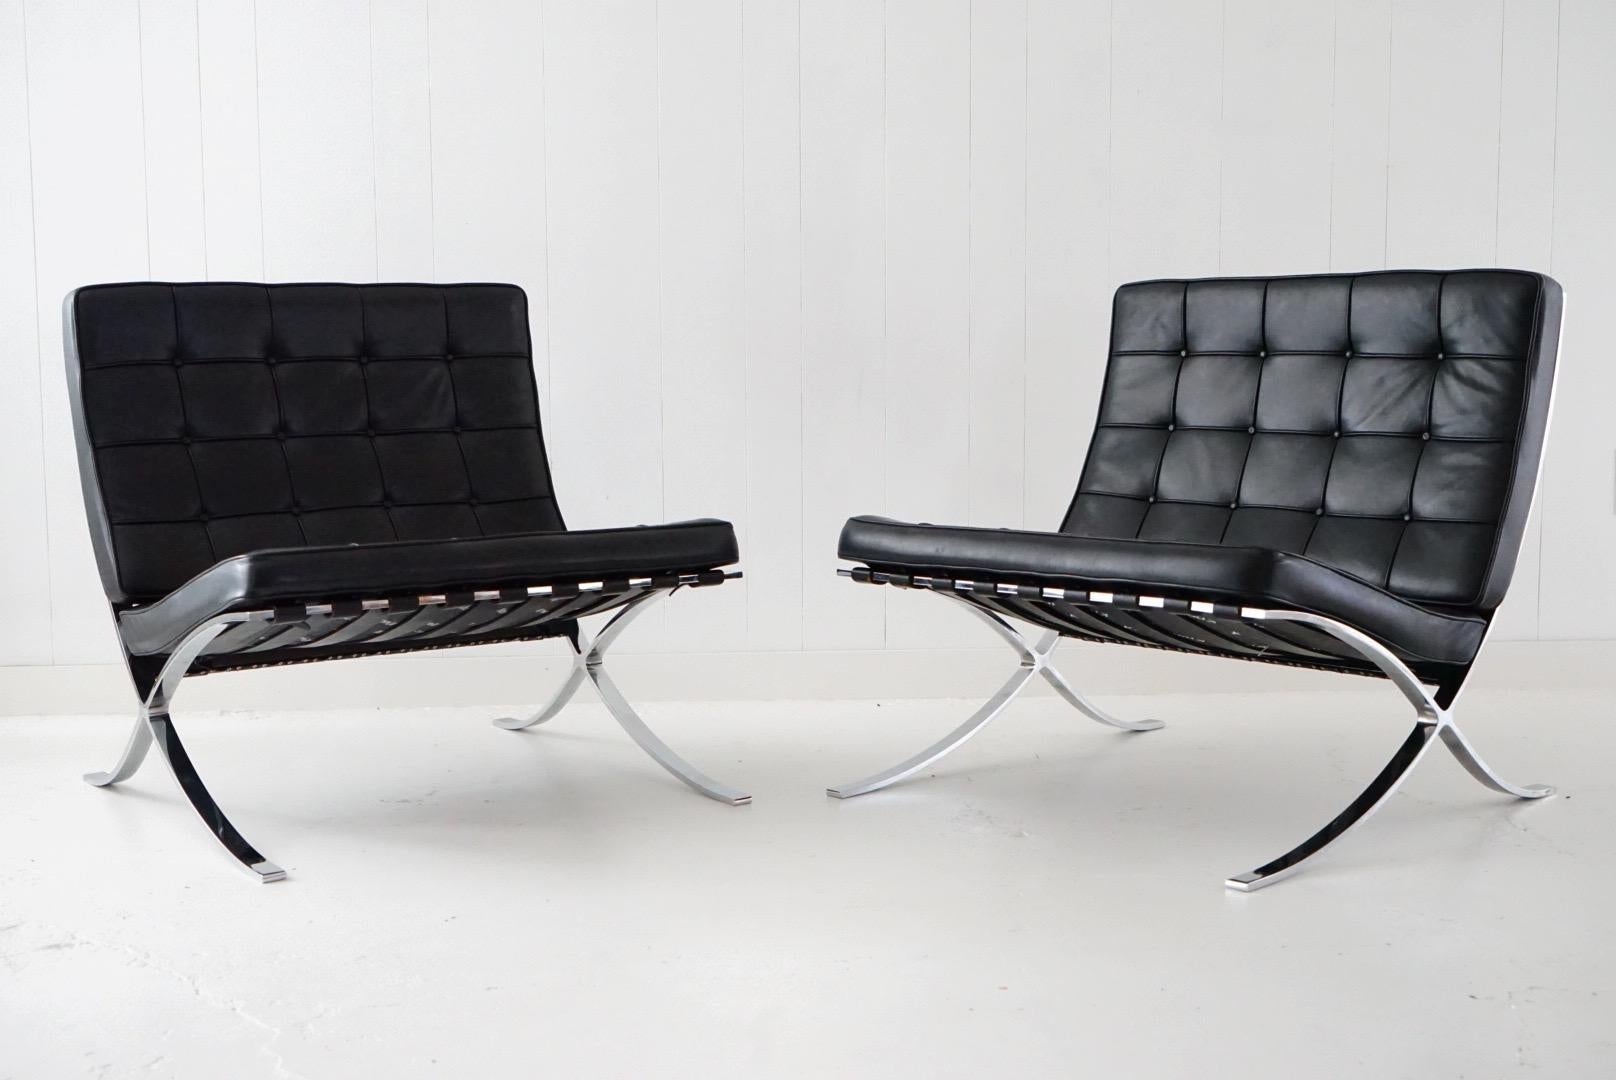 Mid-Century Modern Pair of Barcelona Lounge Chairs by Mies van der Rohe for Knoll Studios, Signed